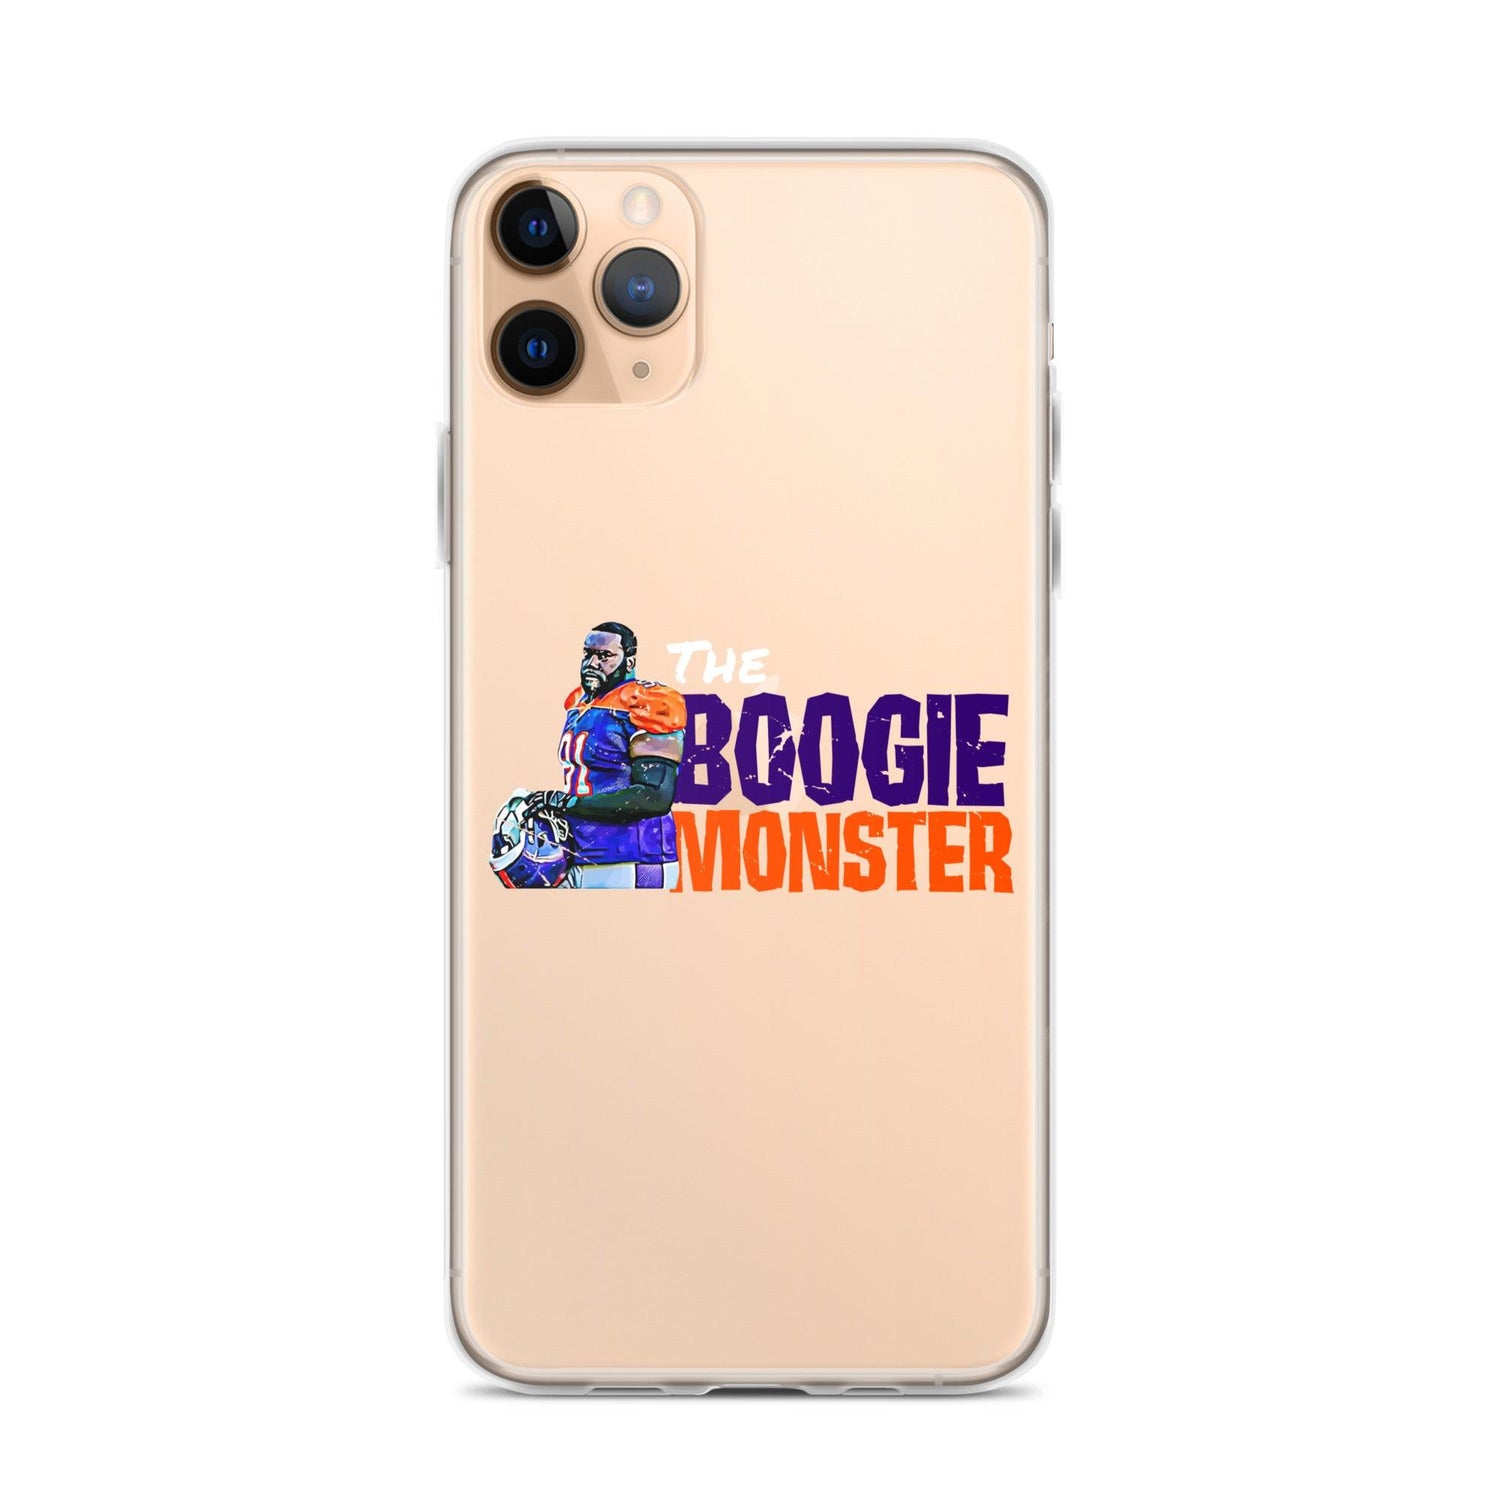 Boogie Roberts "Boogie Monster" iPhone Case - Fan Arch